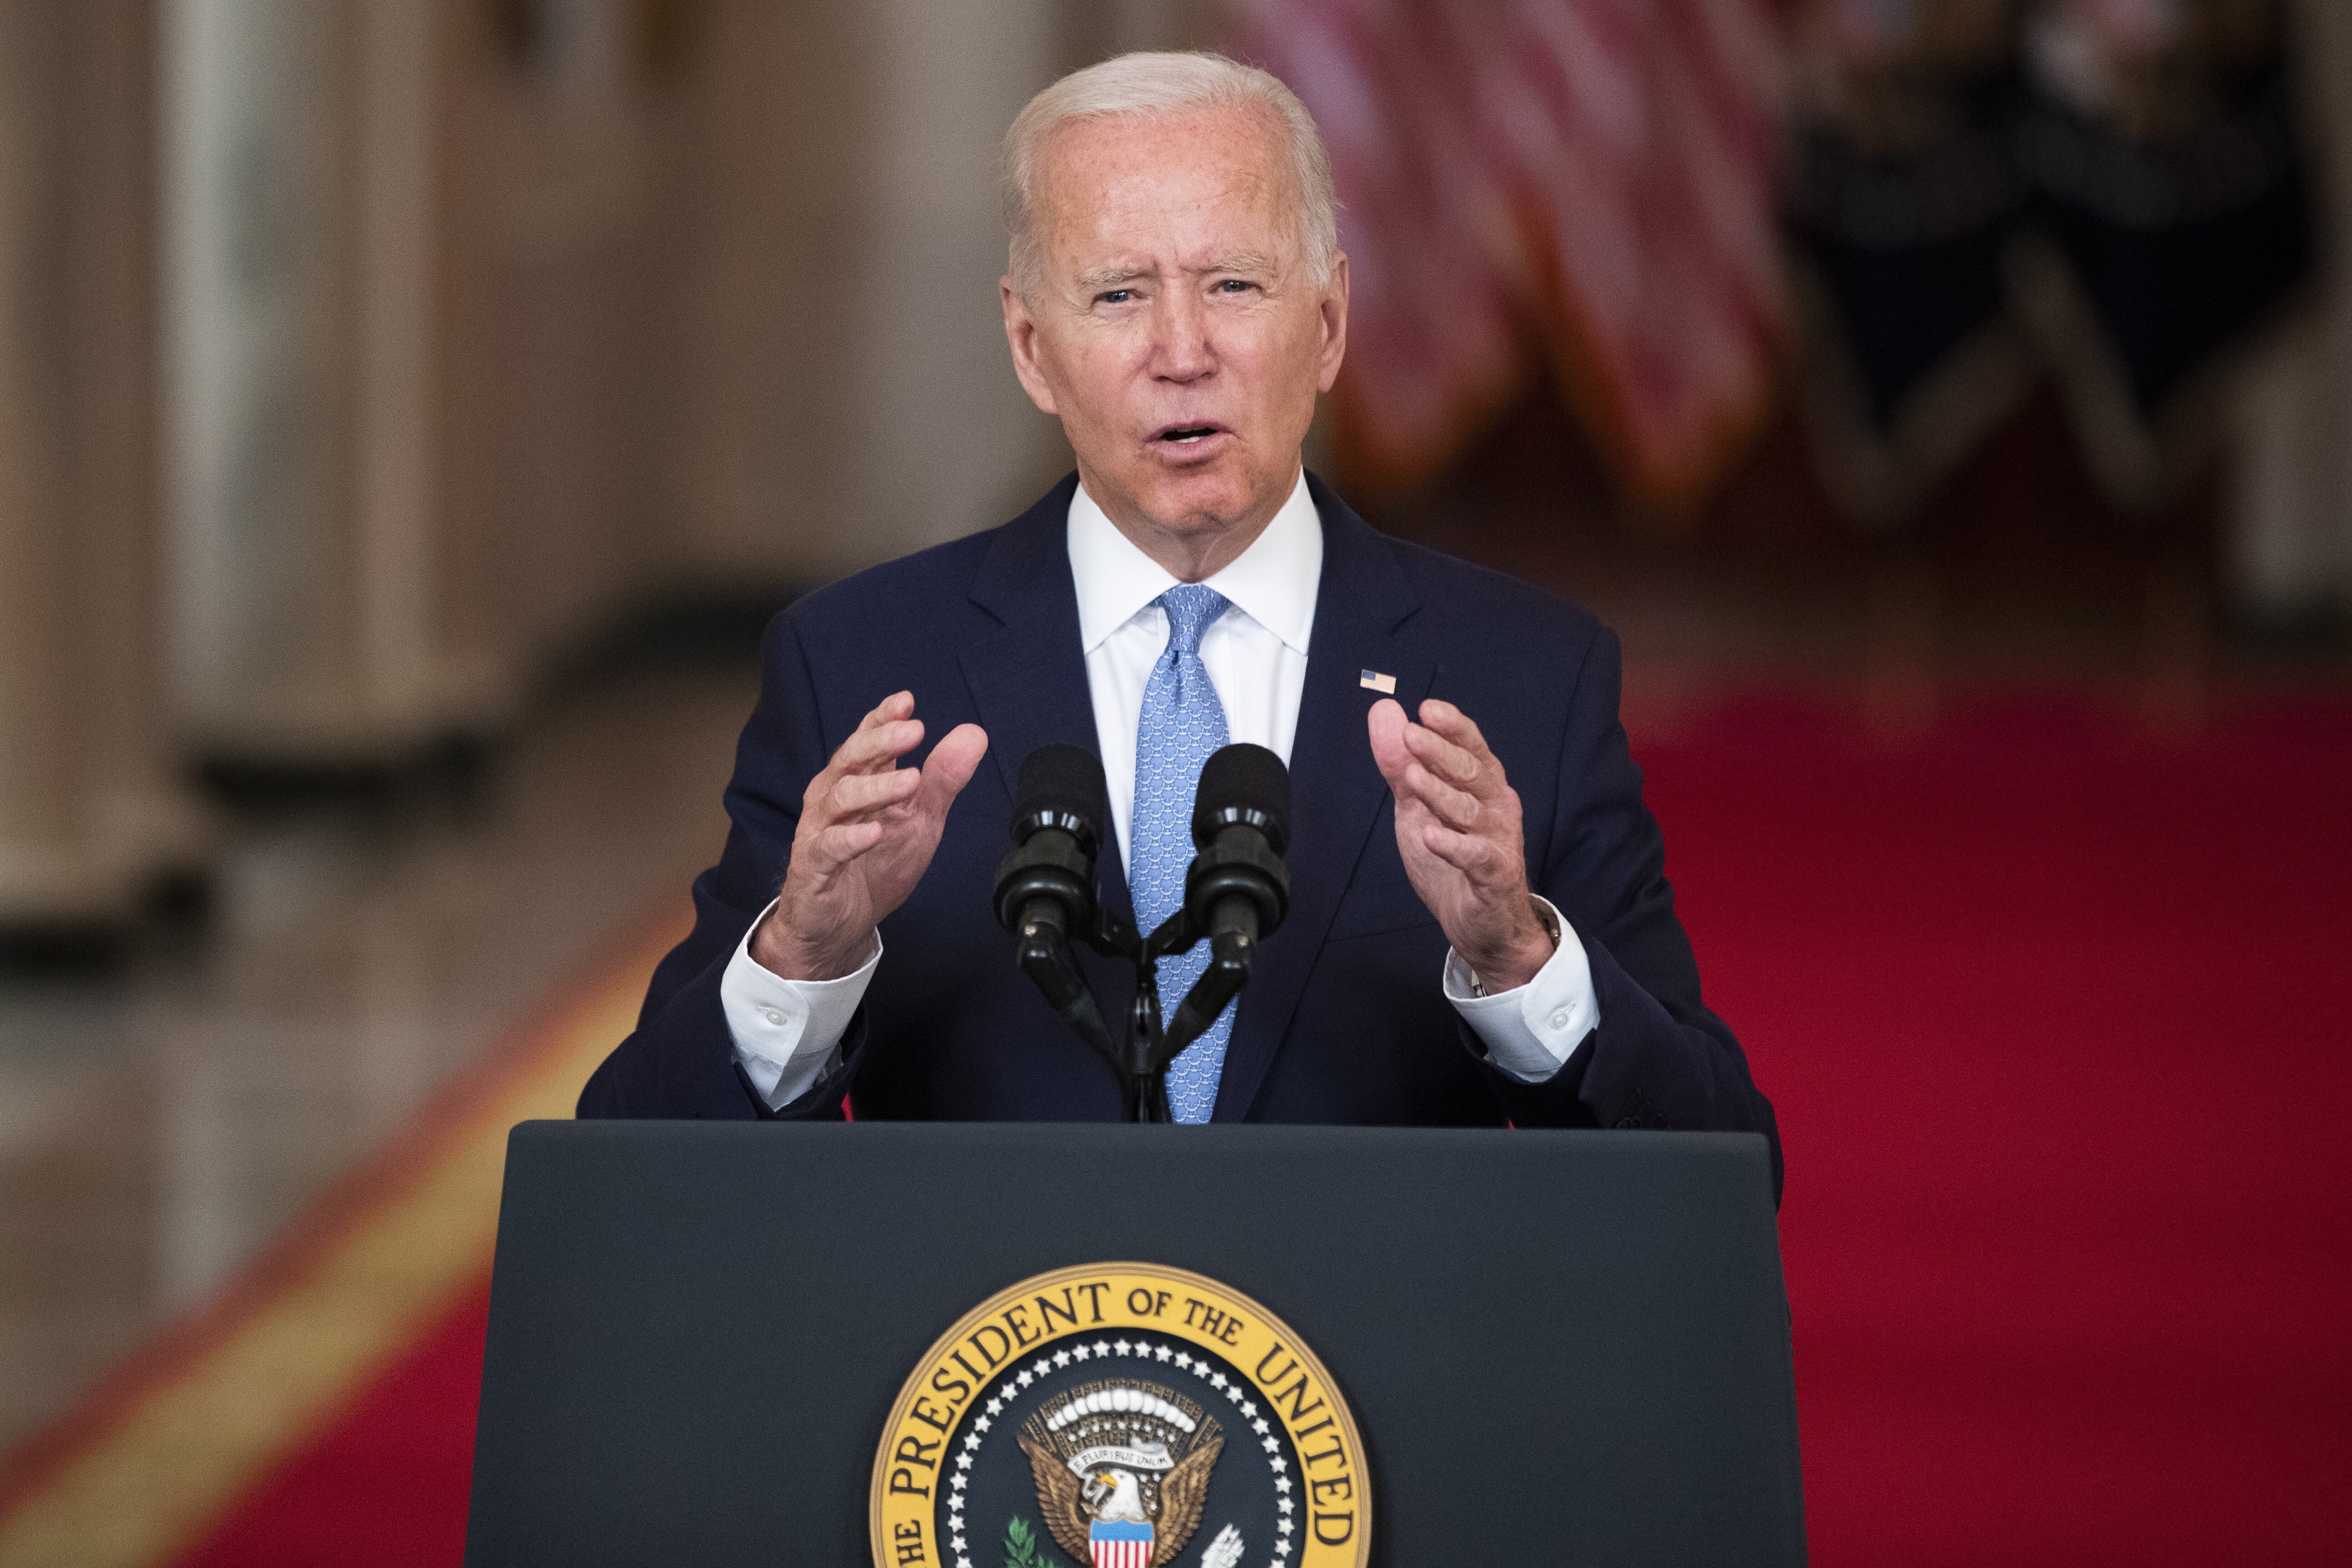 US President Joe Biden delivers remarks on the end of the war in Afghanistan at the White House in Washington on Tuesday. Photo: EPA-EFE